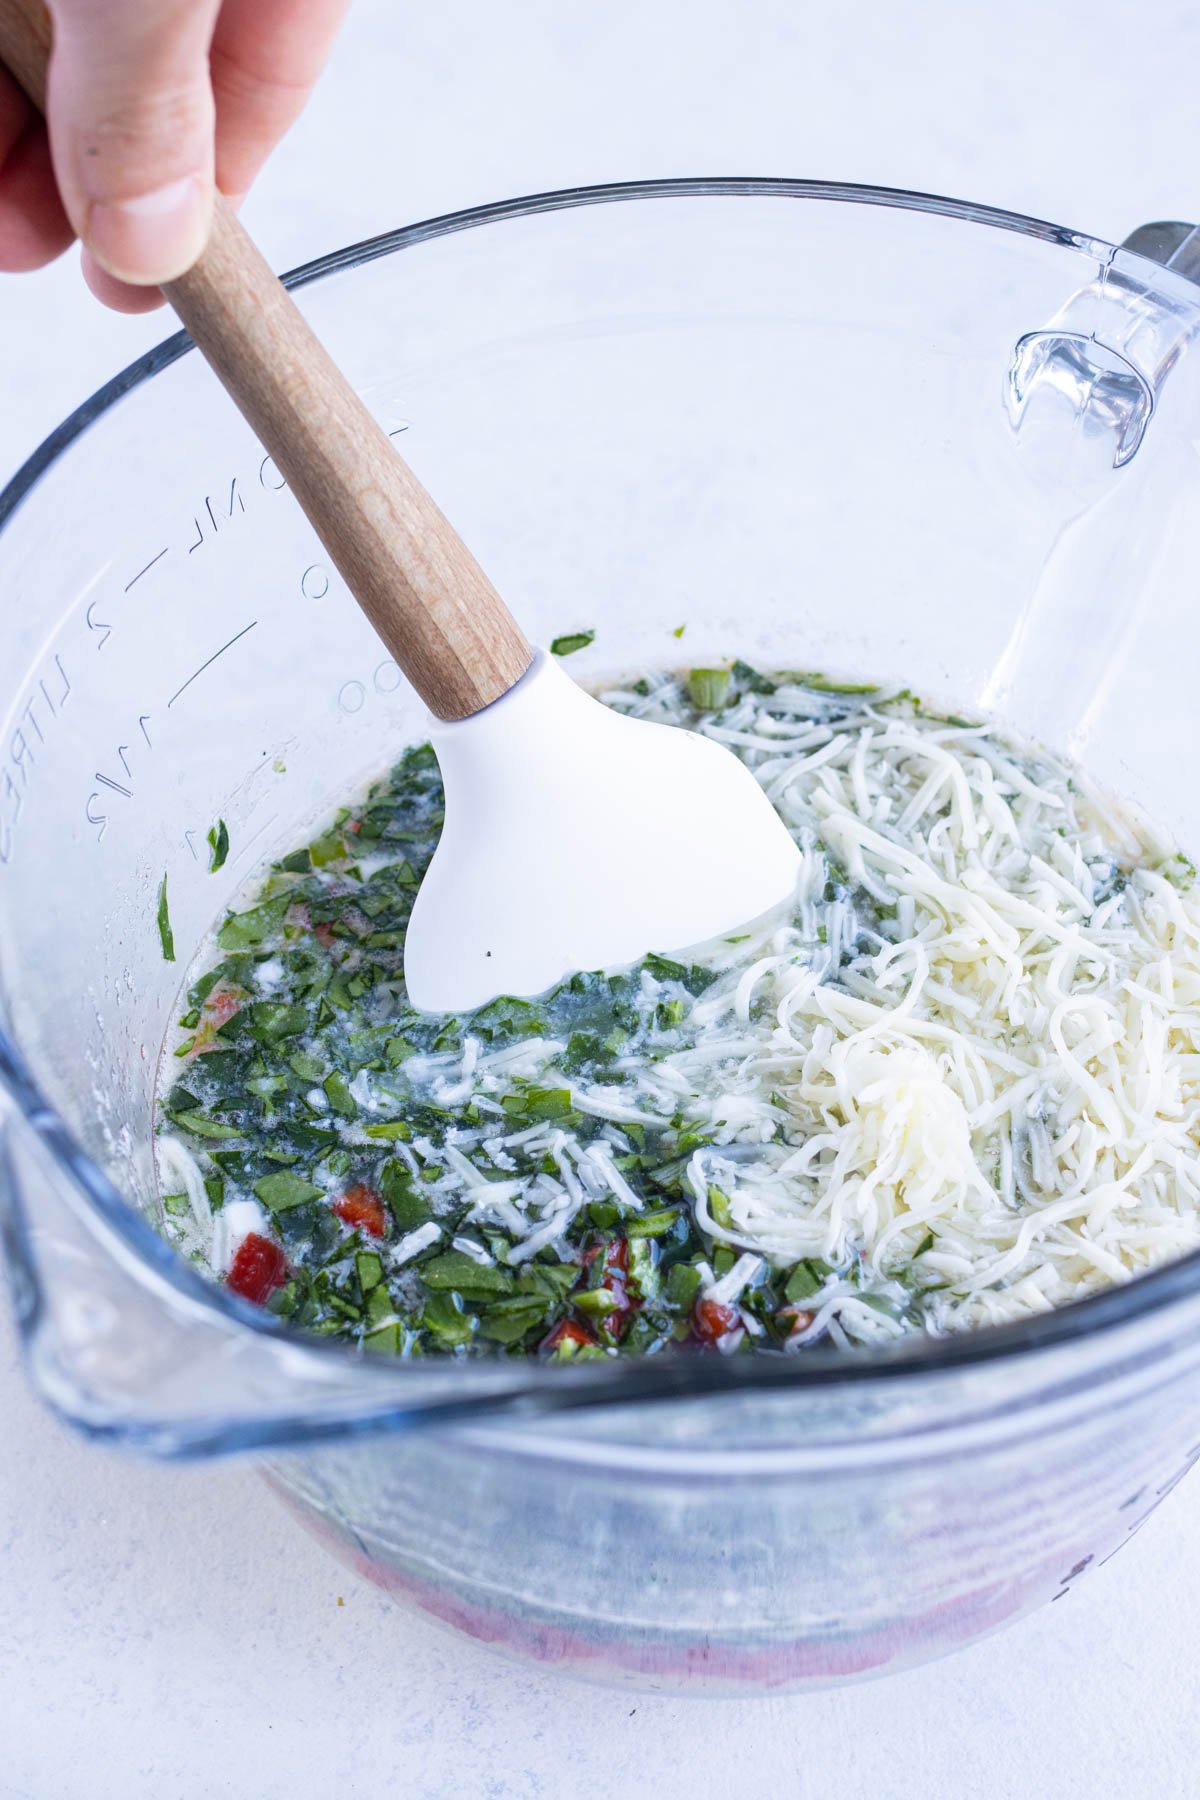 Chopped bell peppers, spinach and cheeses are added to the bowl.